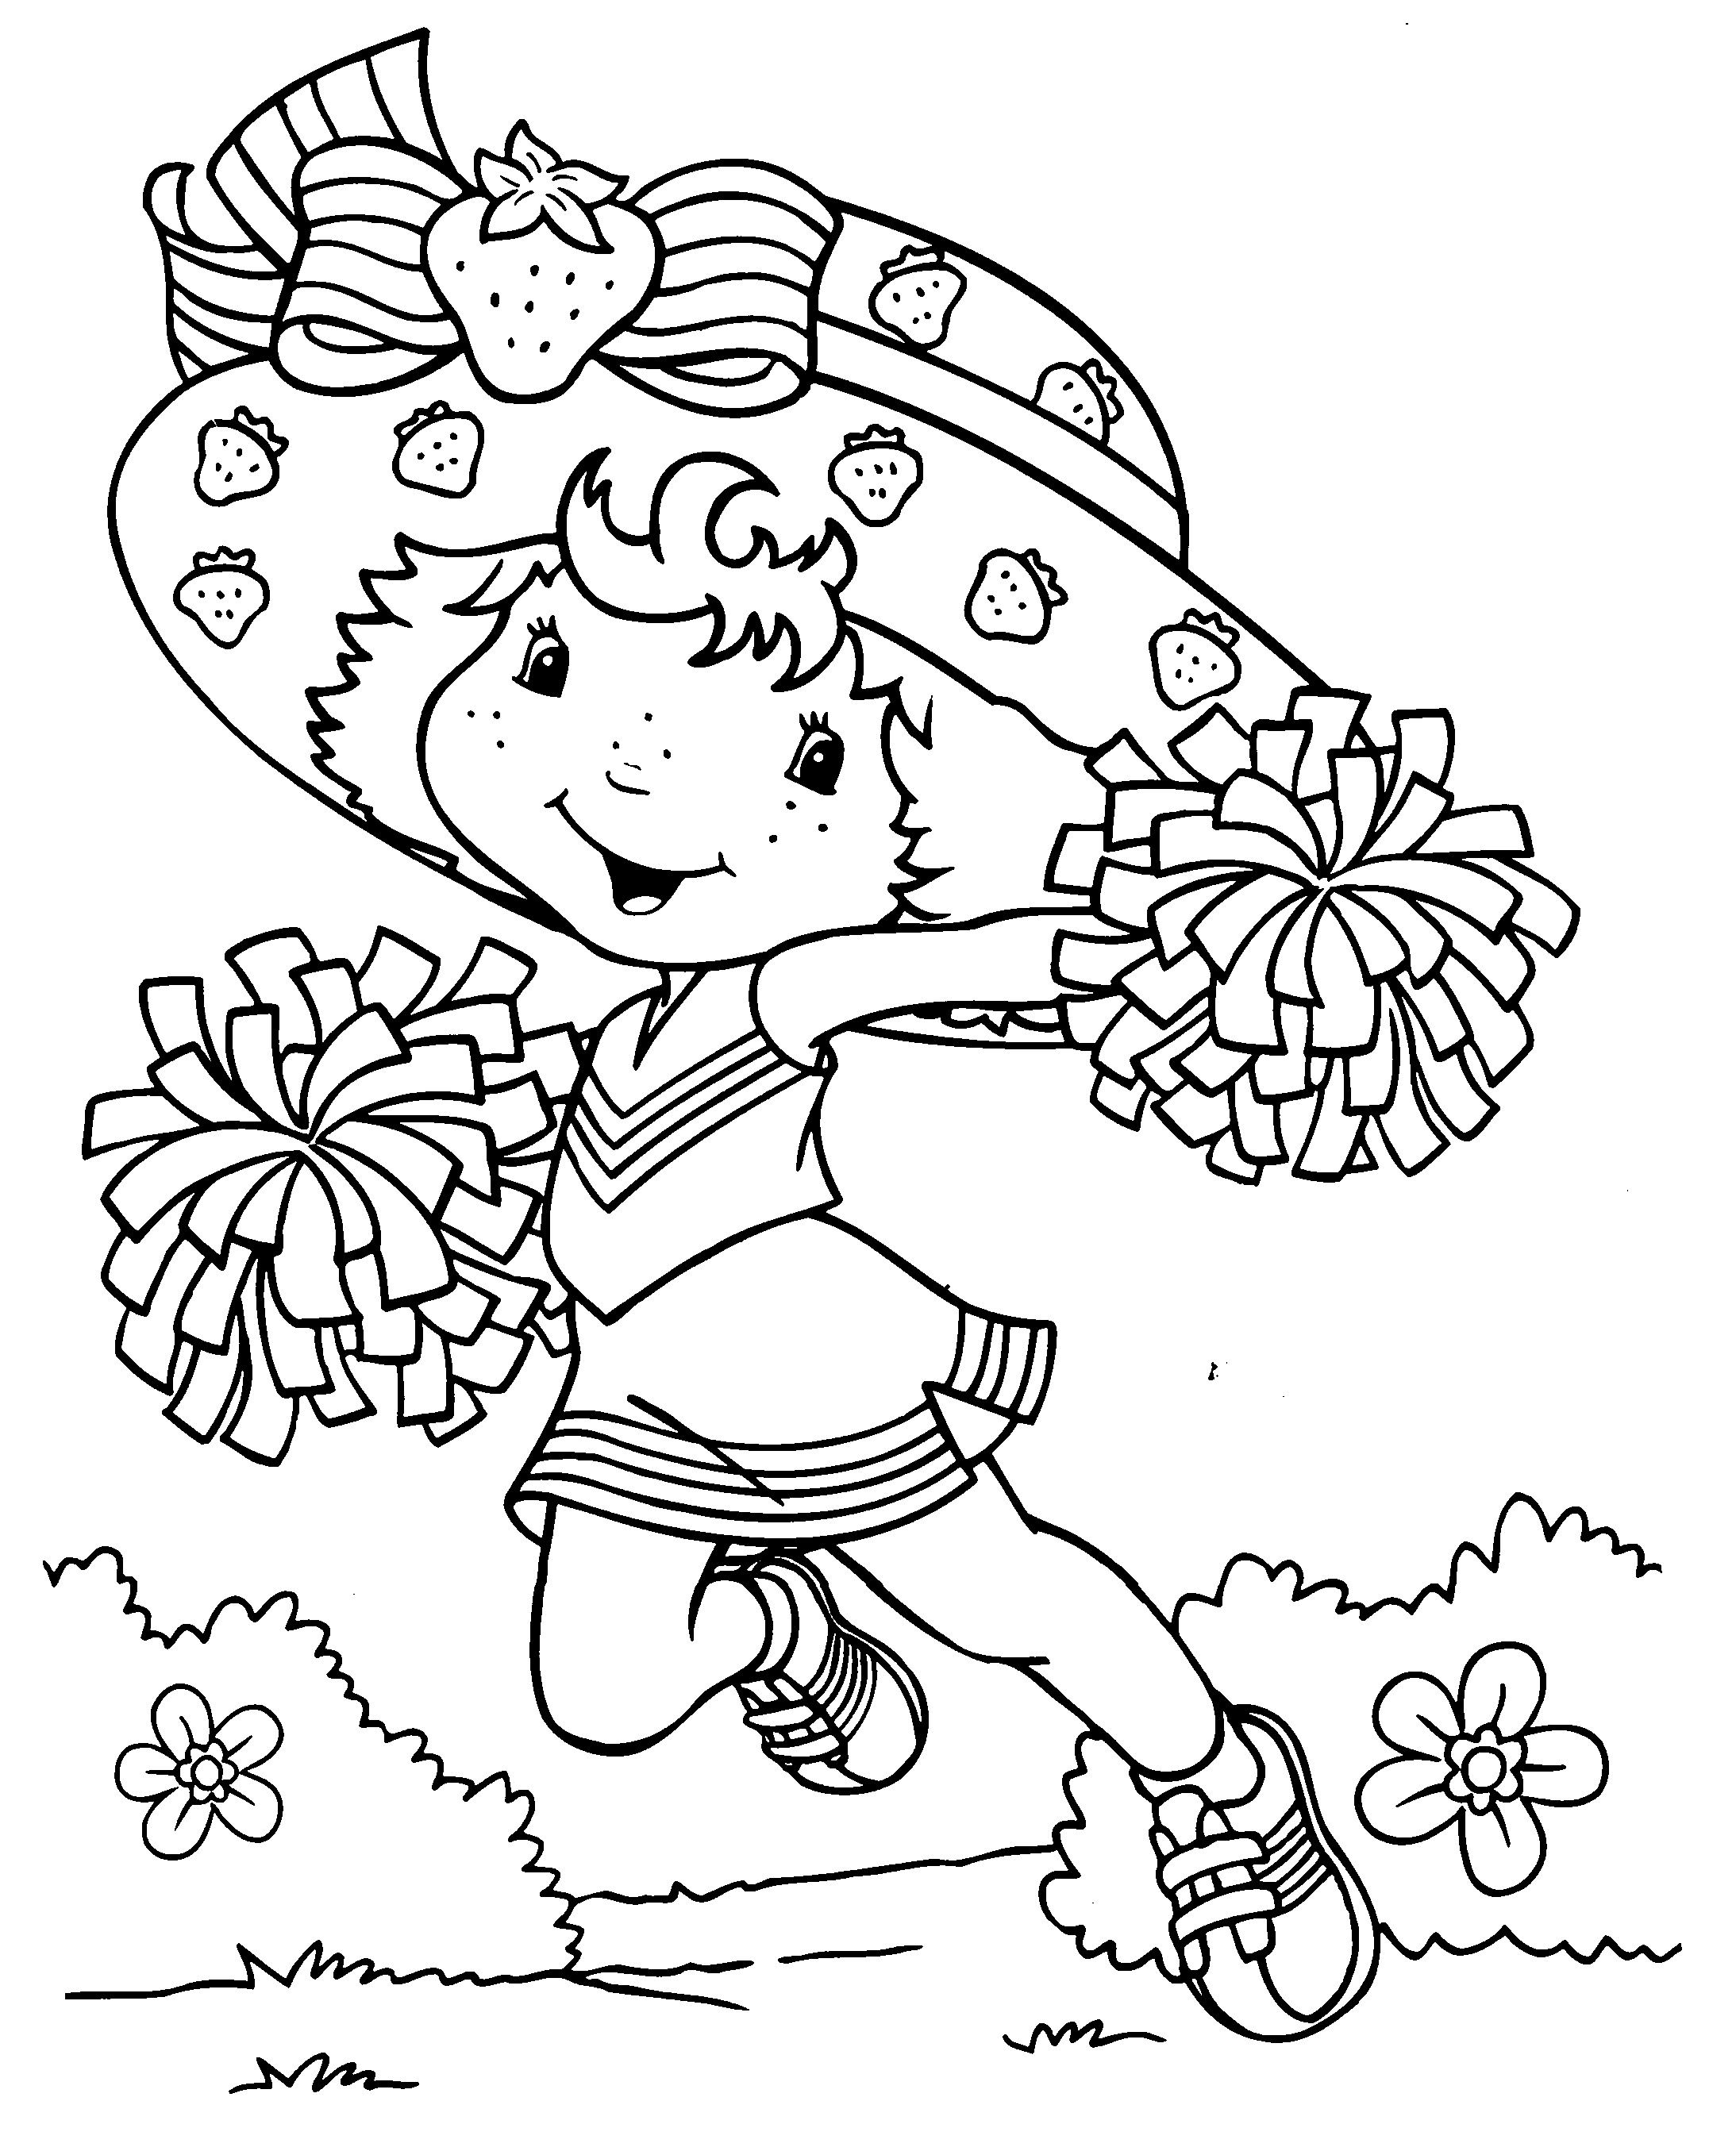 Coloring pages strawberry shortcake